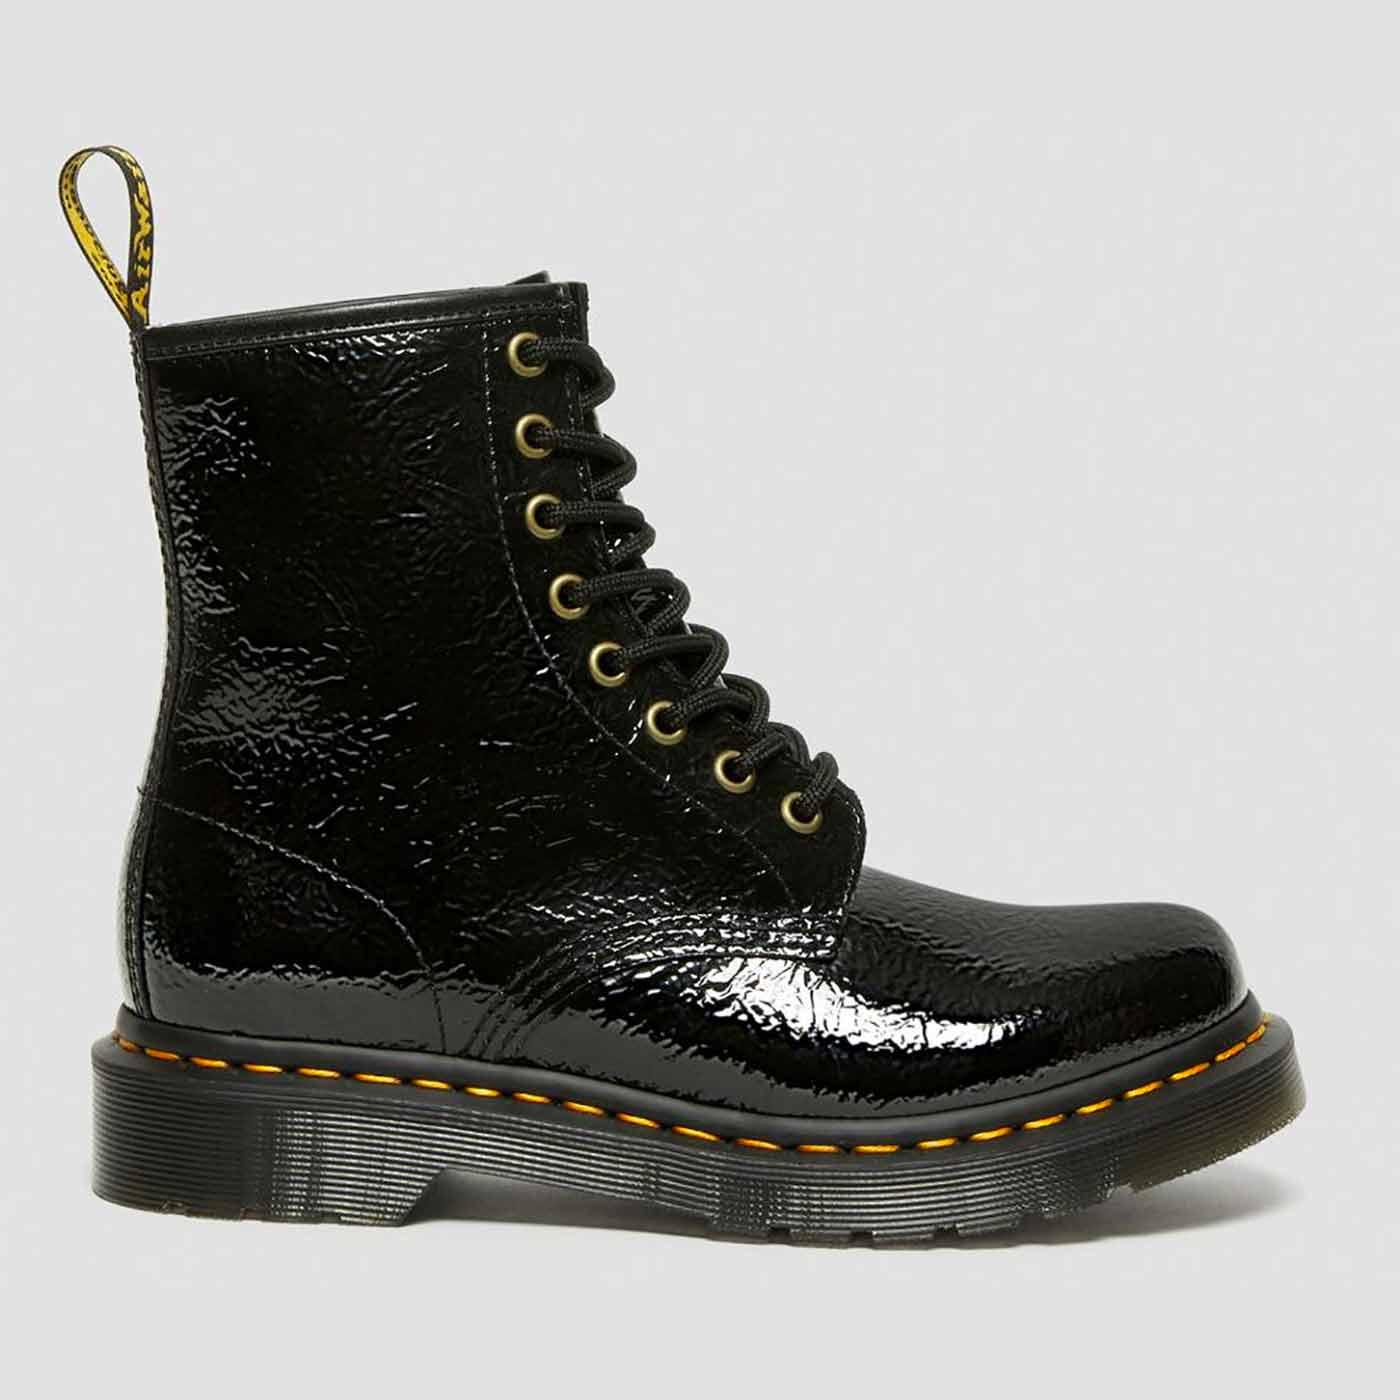 DR MARTENS 1460 Women's Distressed Patent Boots in Black